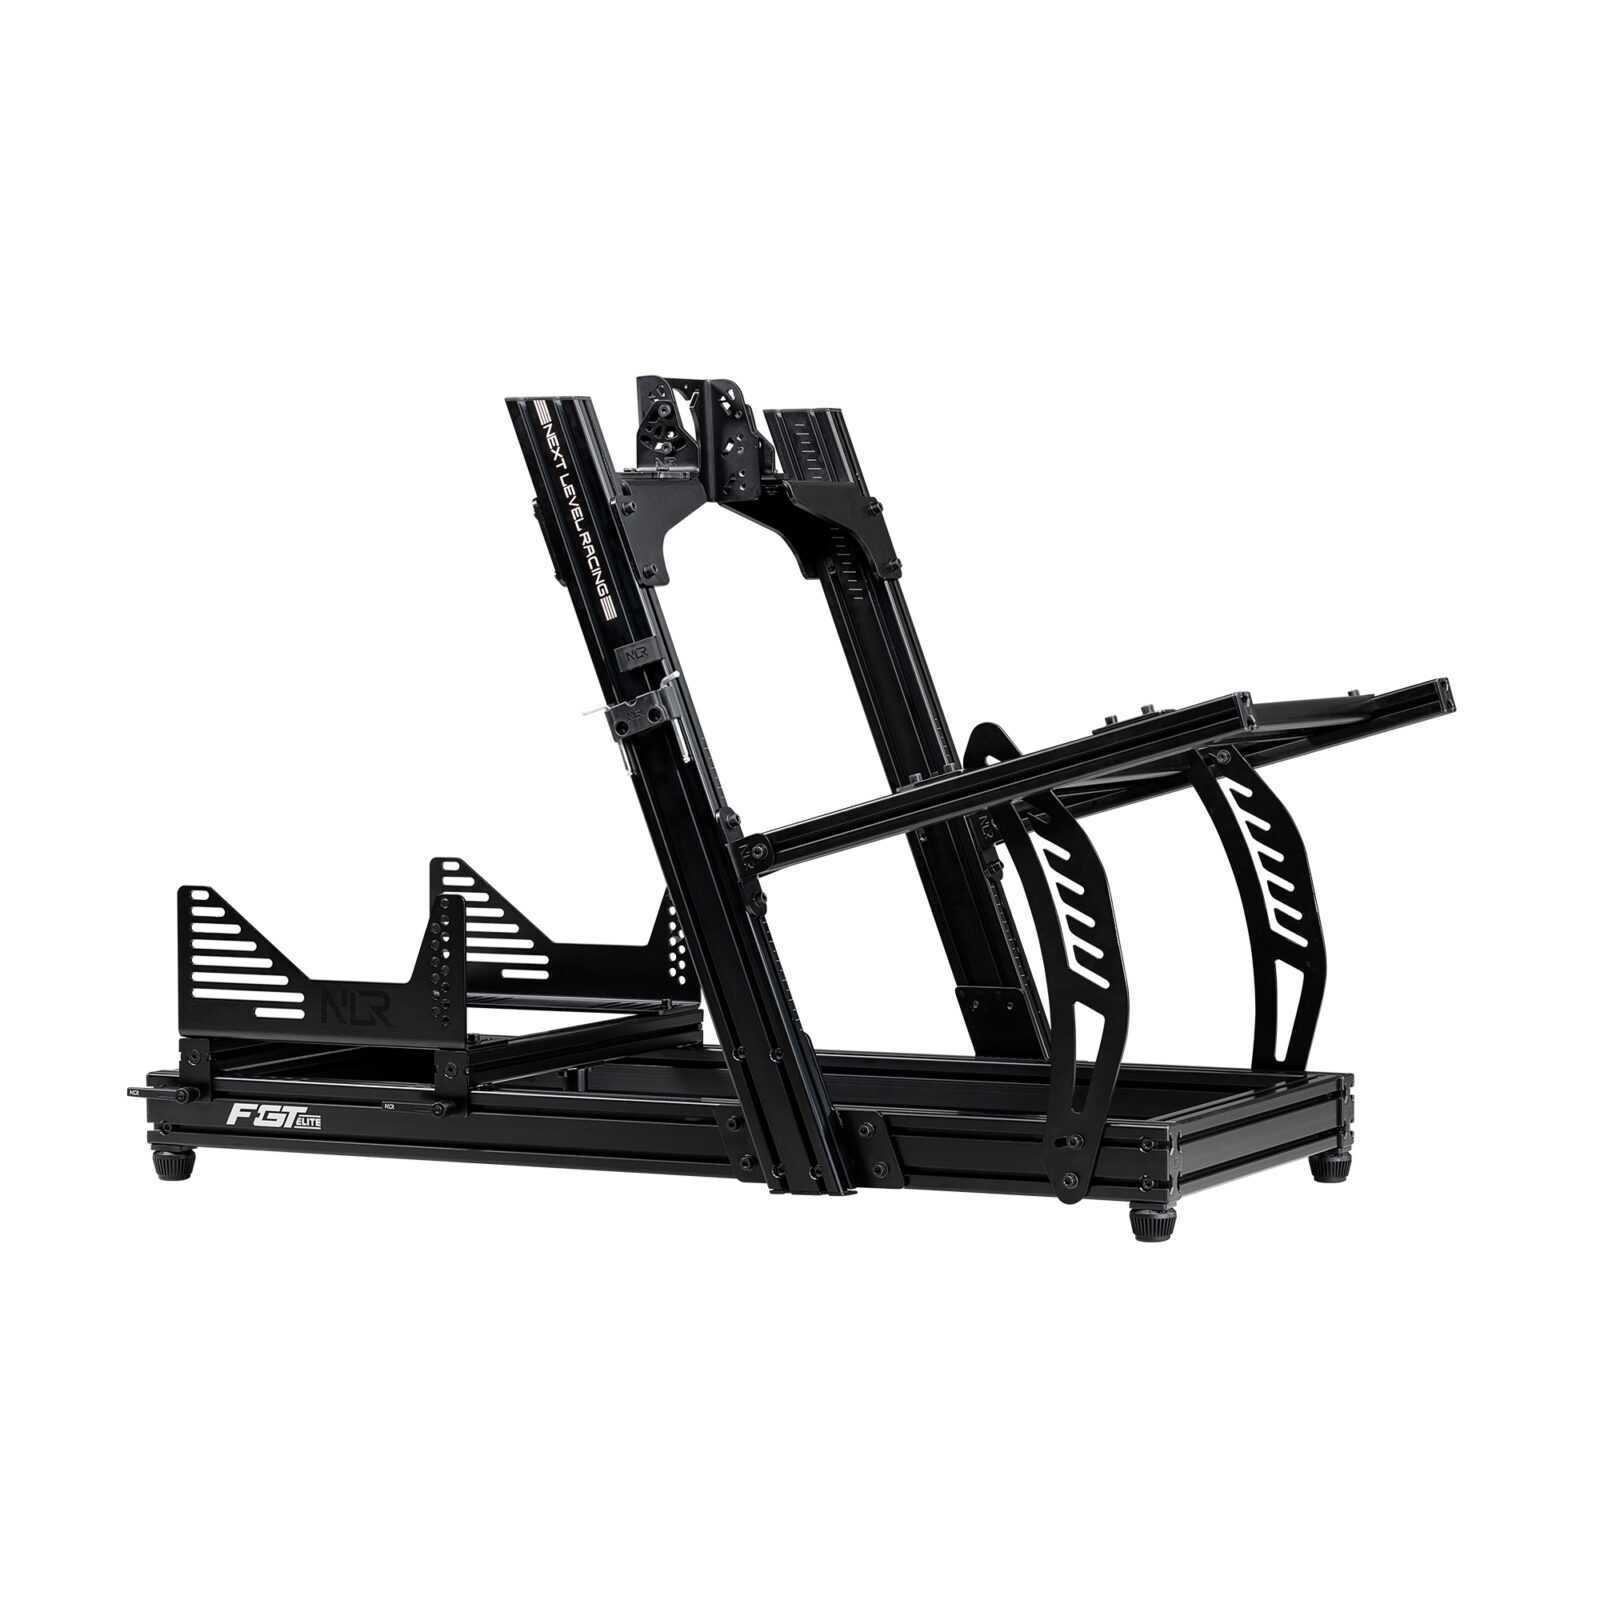 F-GT ELITE DIRECT MONITOR MOUNT - Carbon Grey - Next Level Racing